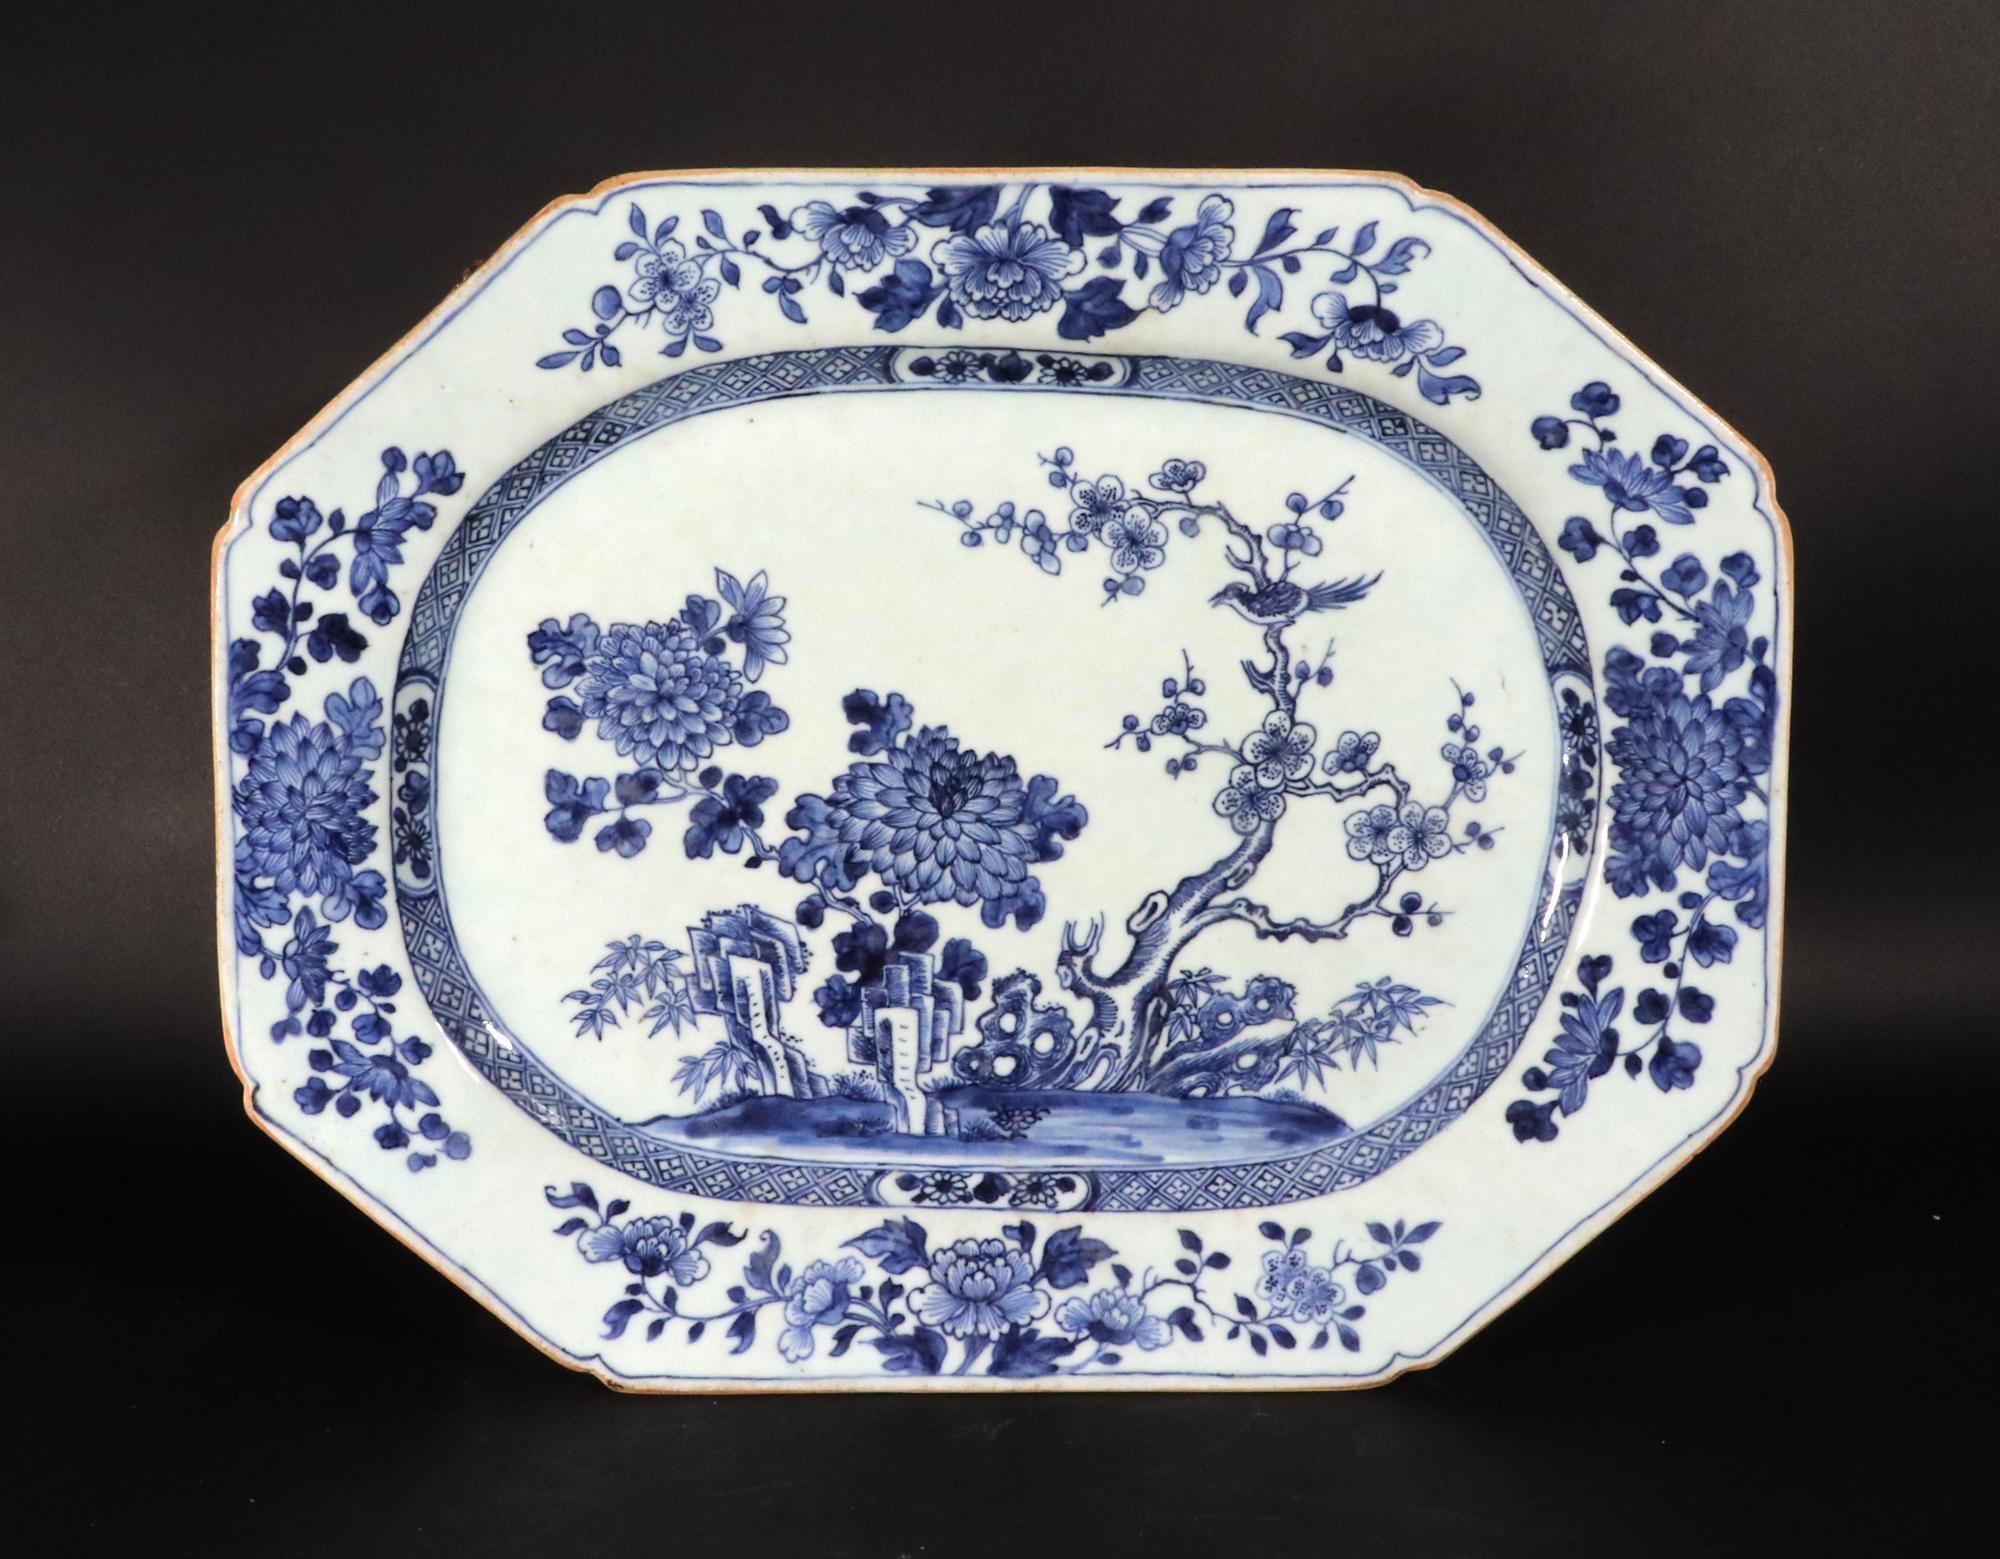 Chinese Export Underglaze Porcelain Rectangular Dish
Circa 1765

The Chinese Export underglaze Blue rectangular dish with canted corners has a well-painted central well with a tree, plants, and flowers issuing from a rock formation.  A large bird